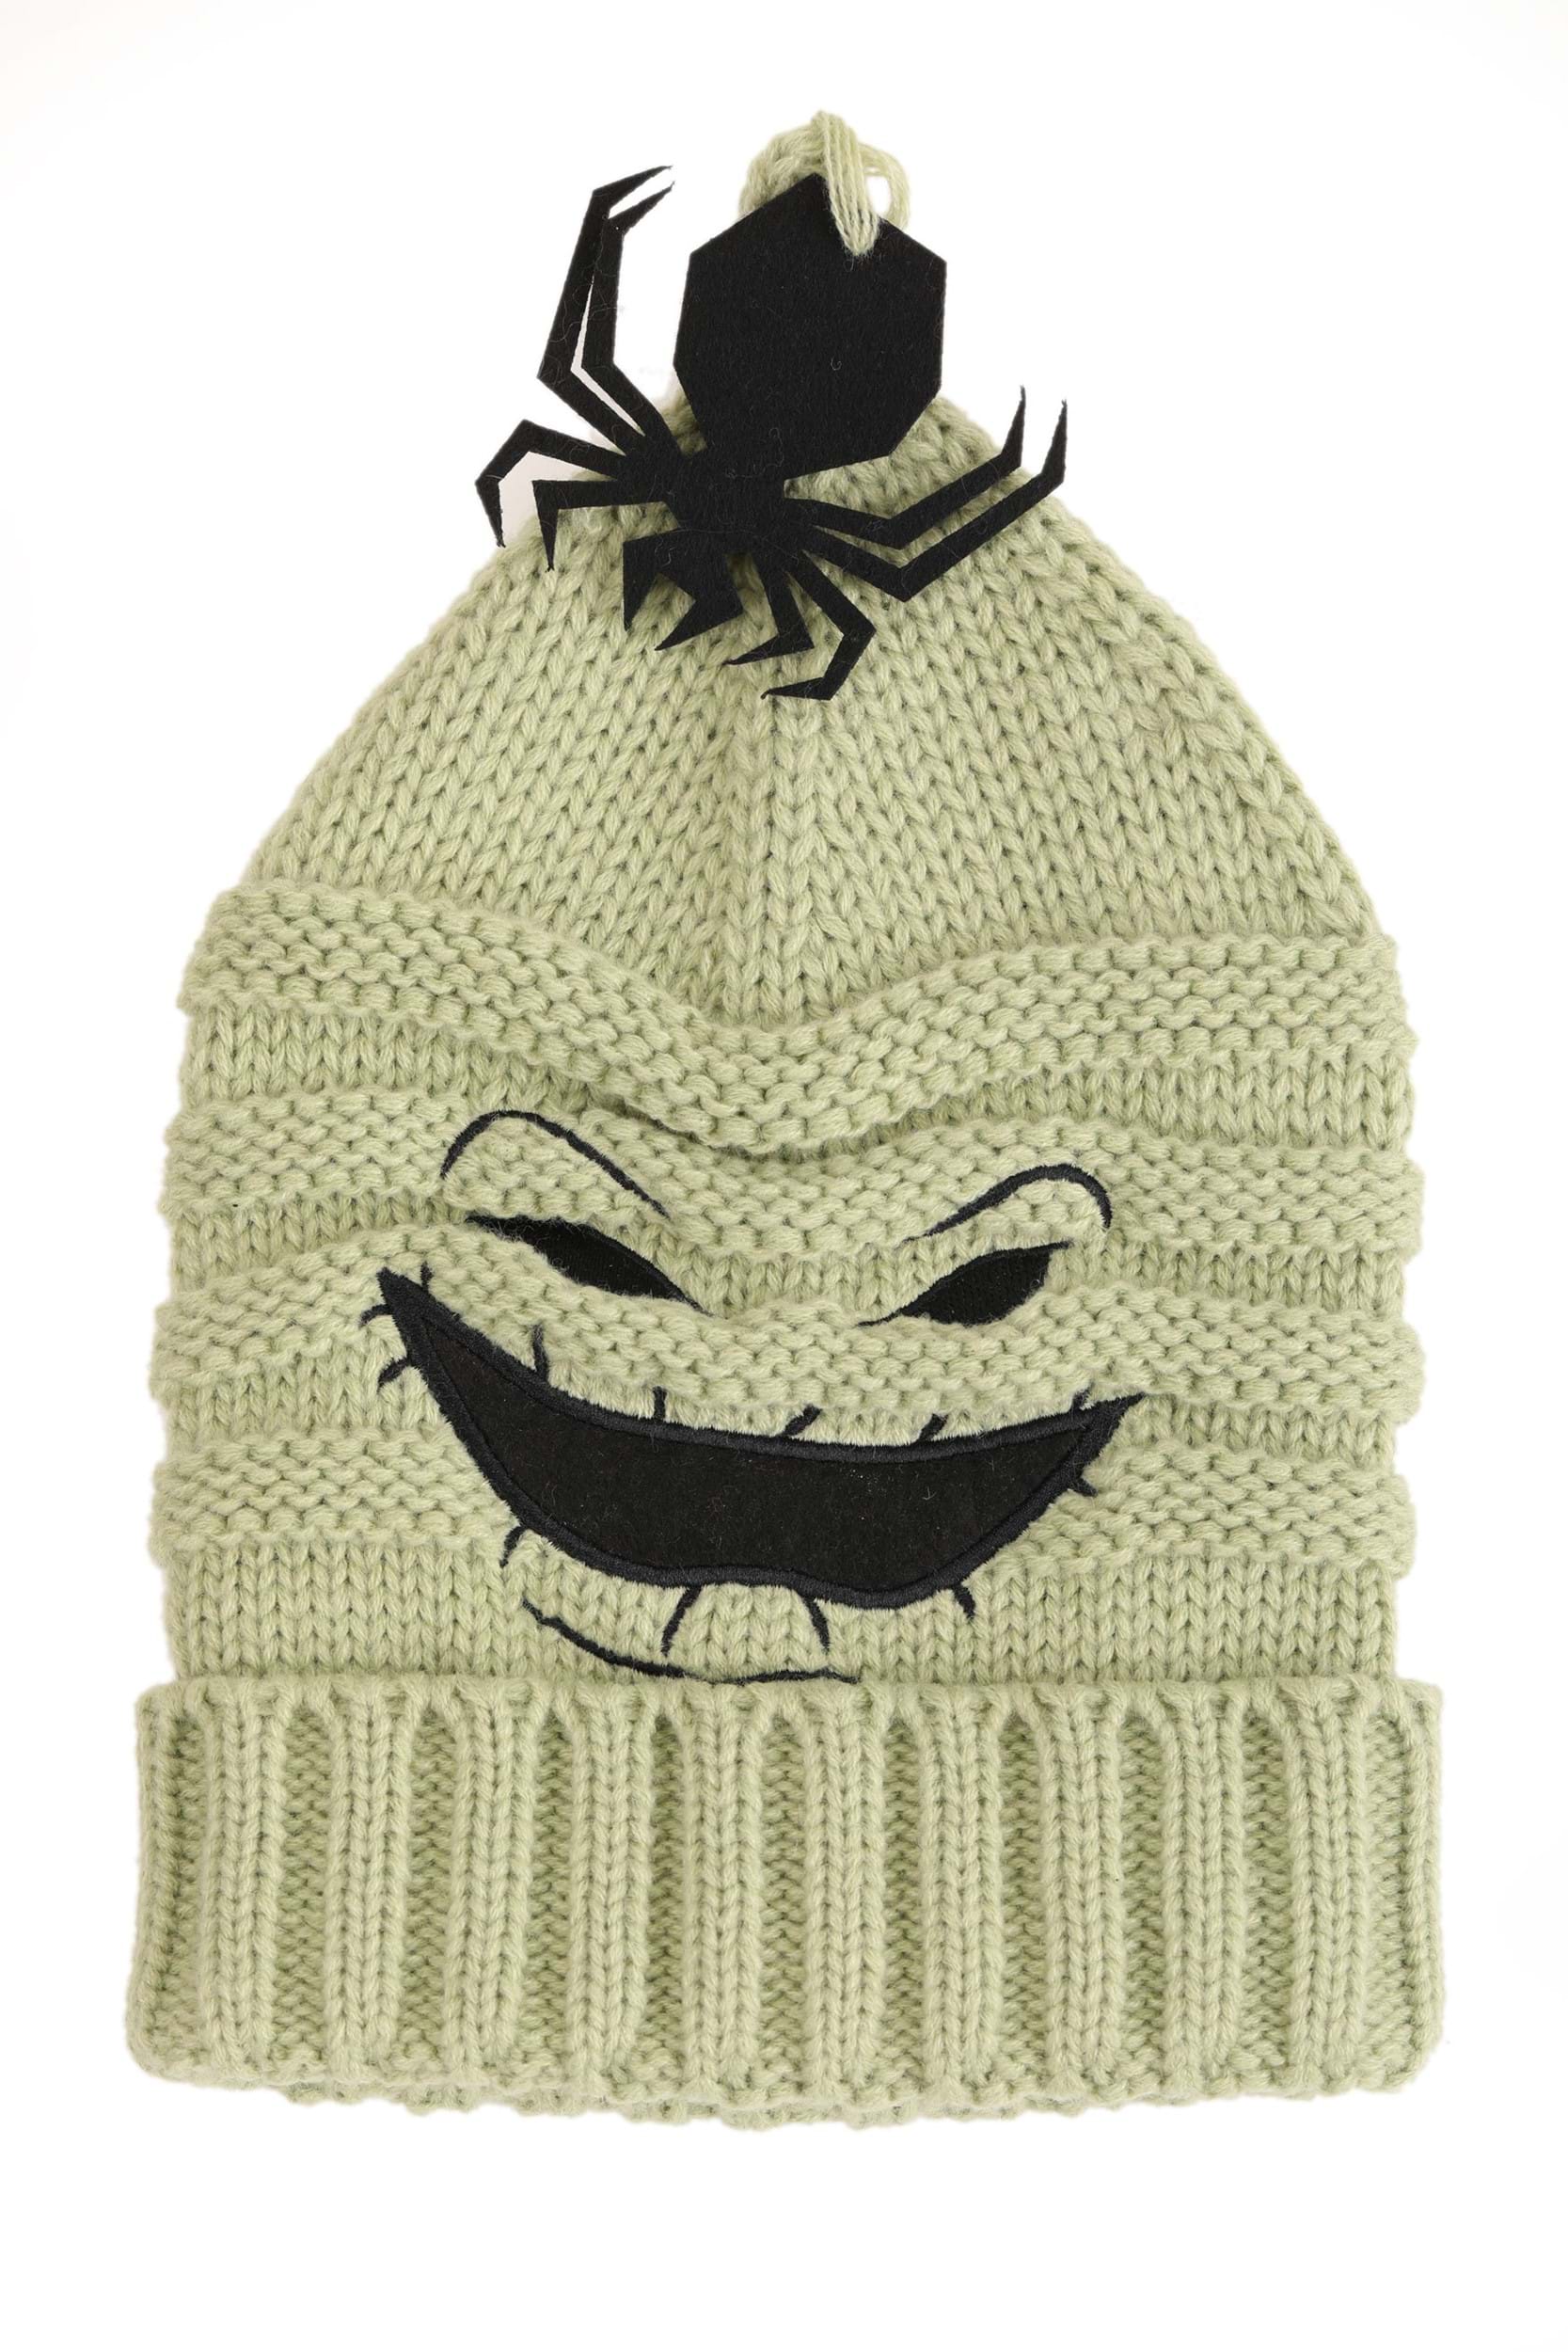 Disney Nightmare Before Christmas Oogie Boogie Knit Hat For Adults